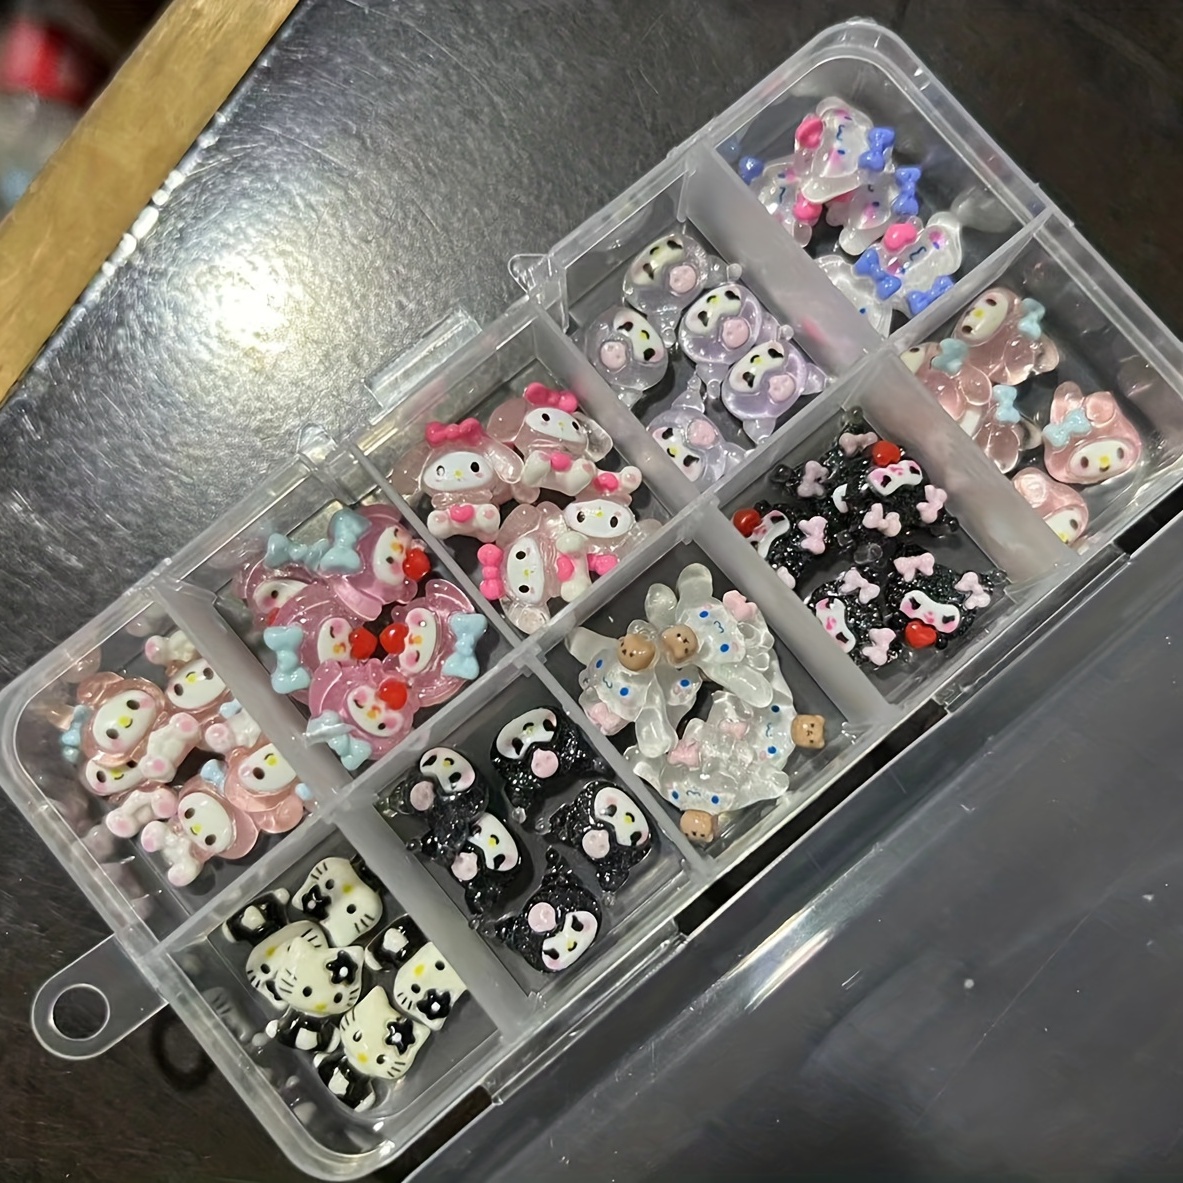 

Cartoon Women' Decoration Kit, Kawaii Resin Nail Jewelry Crafts For Freestyle Diy Manicure Accessories